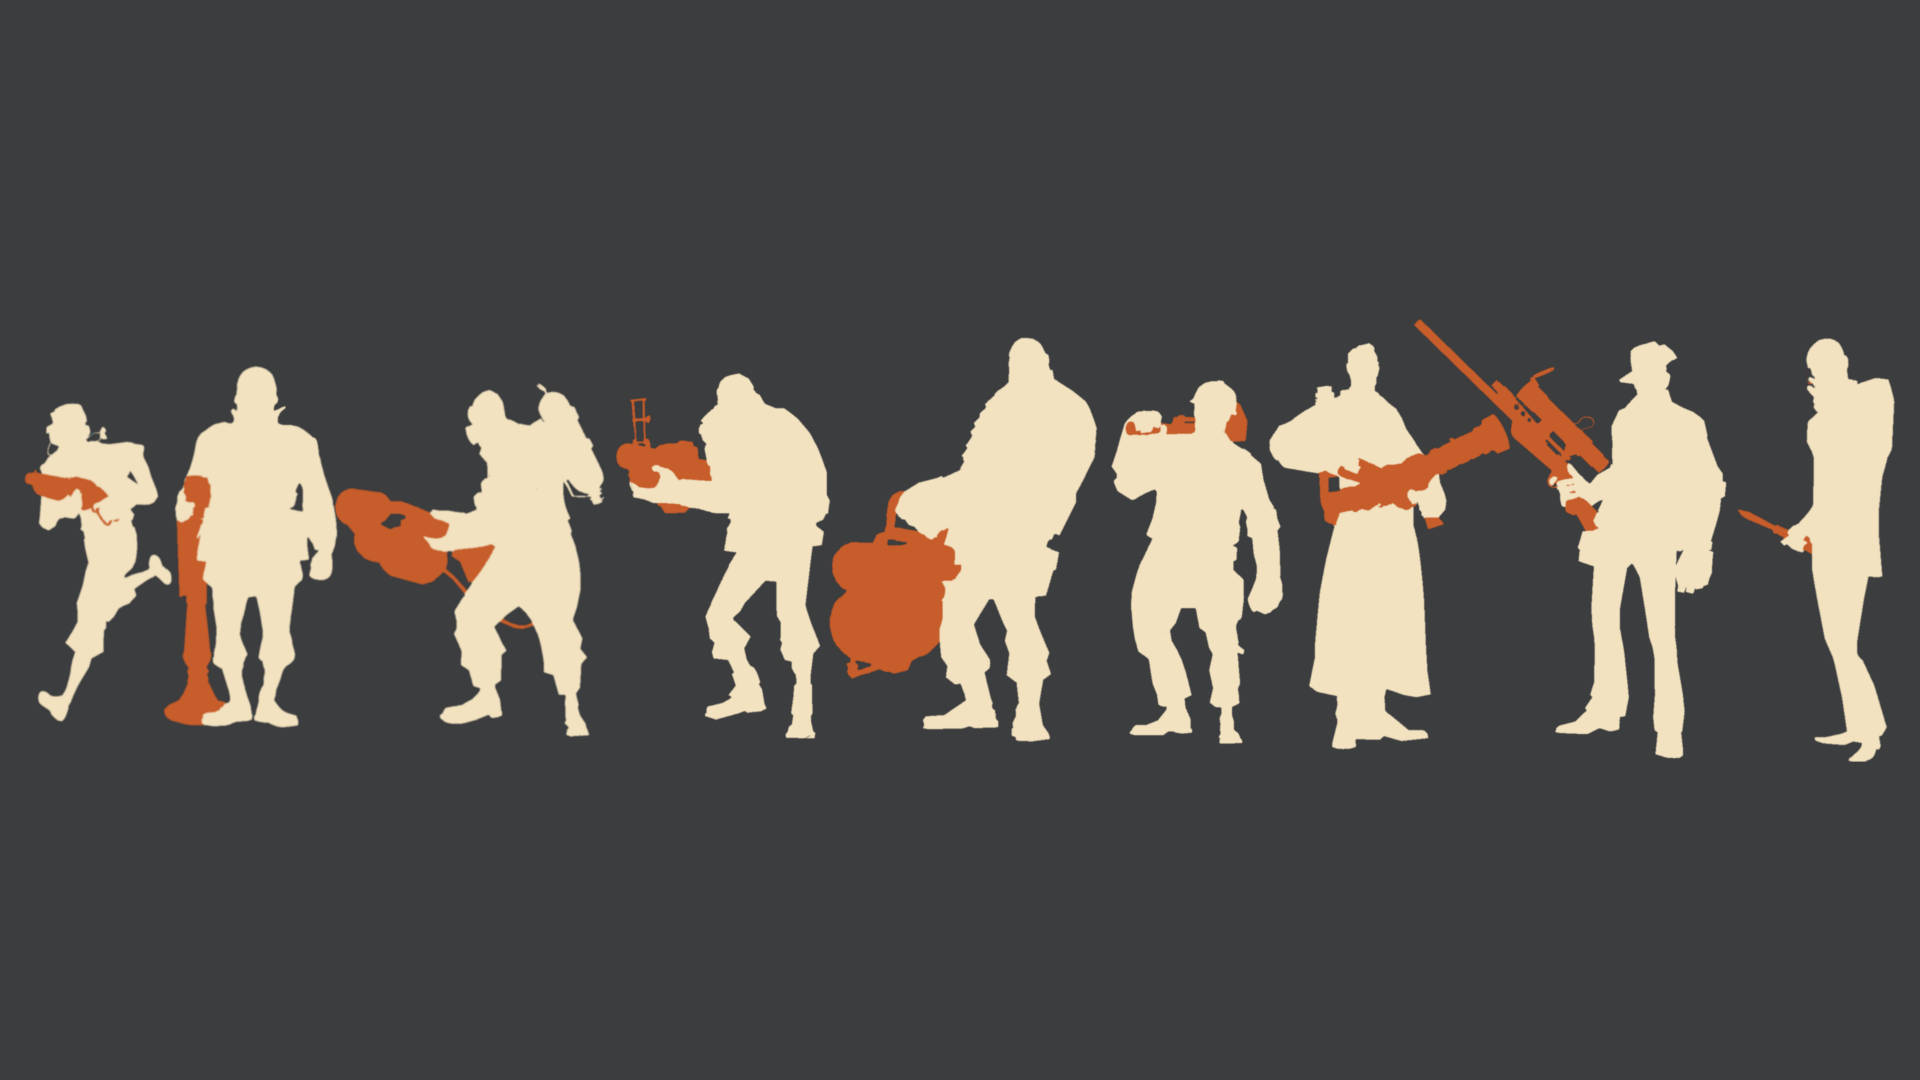 Tf2 Silhouettes On Black Background Background